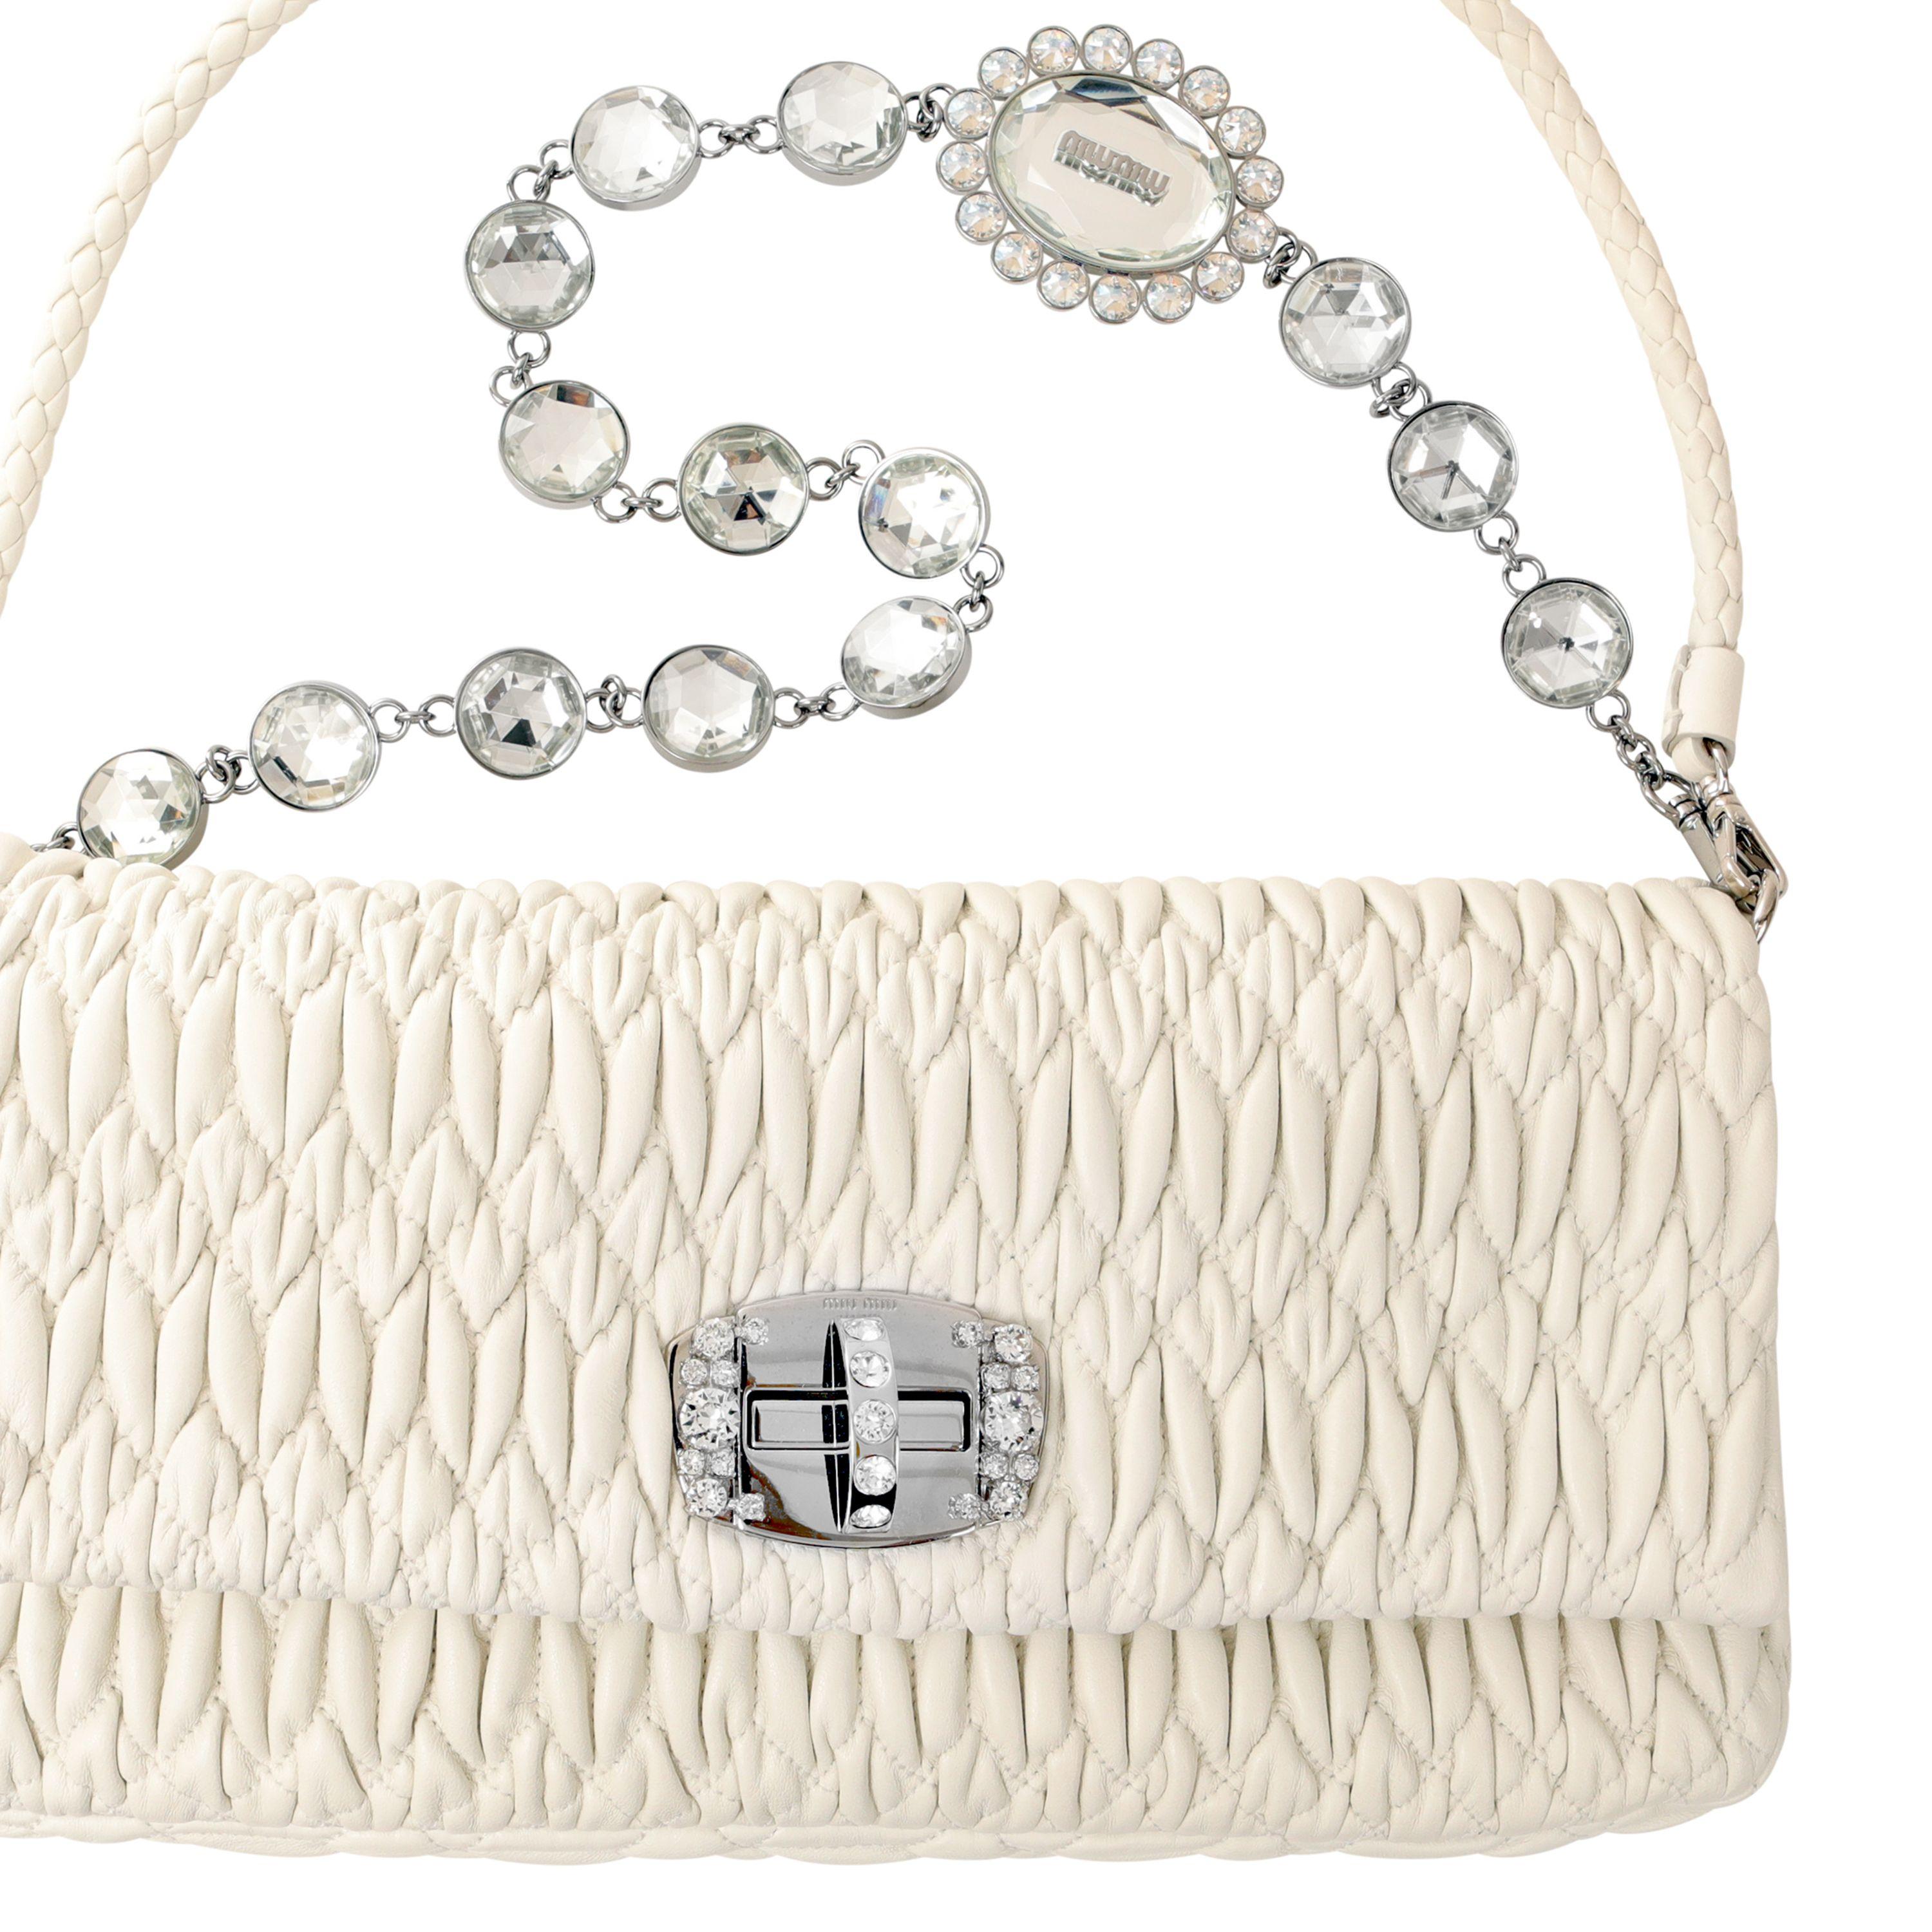 Miu Miu White Iconic Crystal Cloquè Small Bag with Silver Hardware In Excellent Condition For Sale In Palm Beach, FL